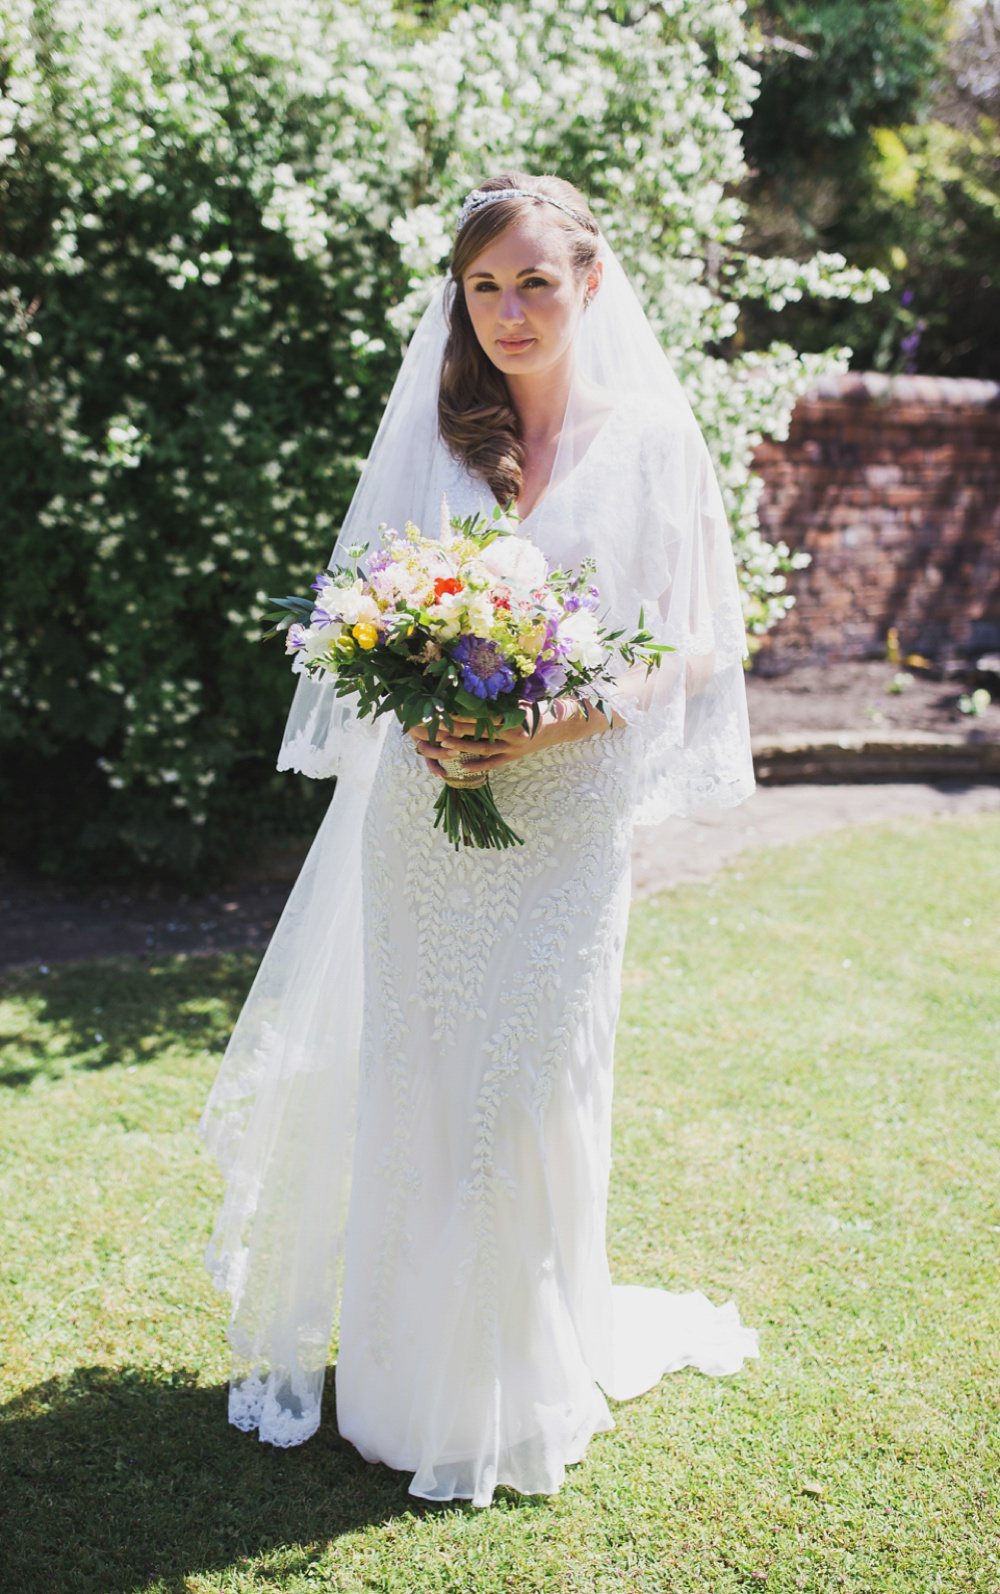 Home Grown British Blooms For a Sweet Village Hall Wedding | Love My ...